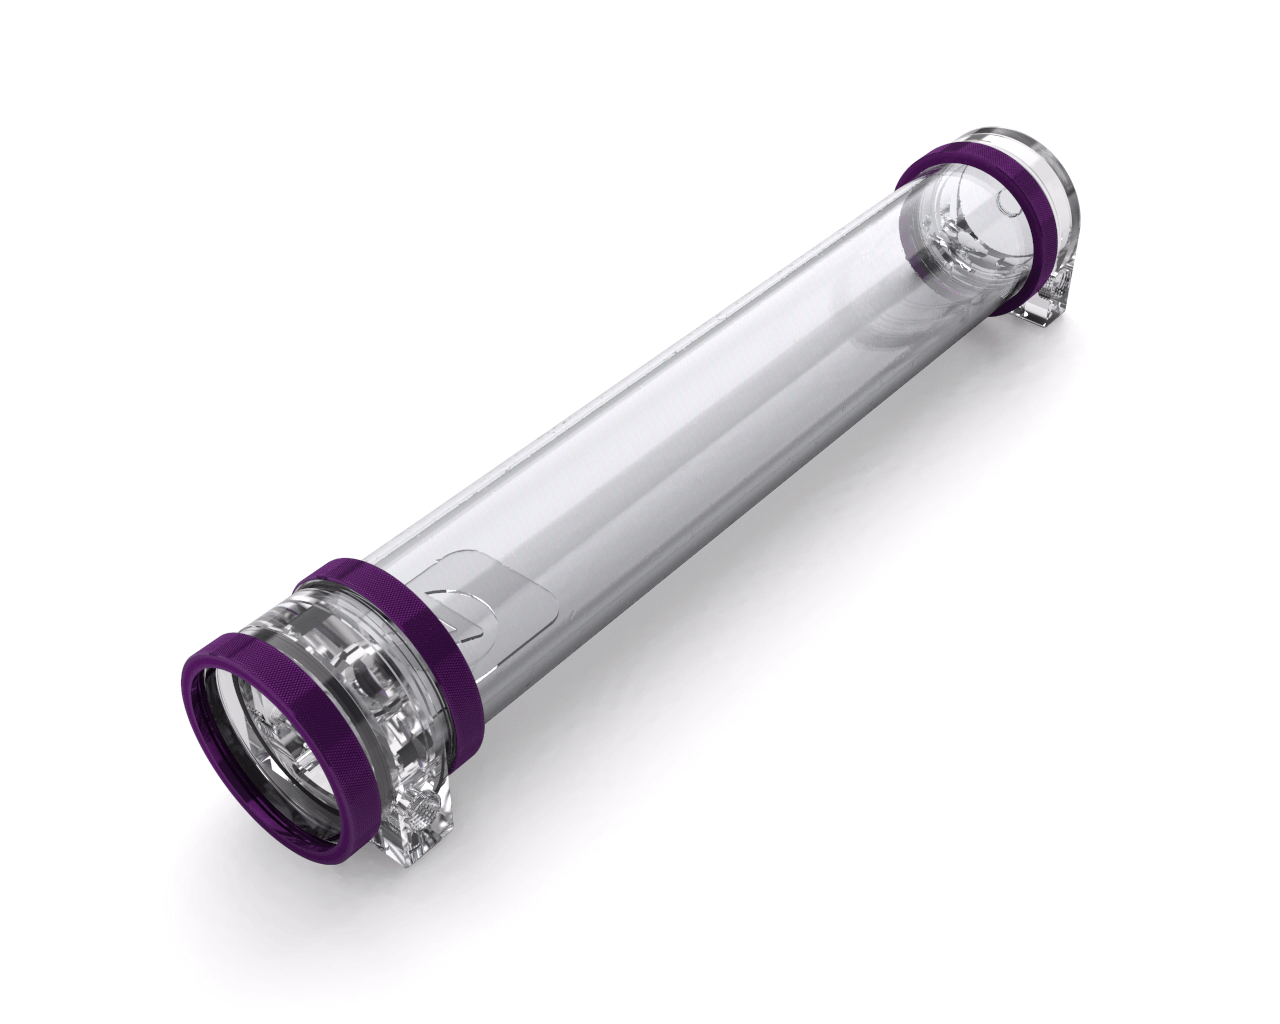 PrimoChill CTR Hard Mount Phase II High Flow D5 Enabled Reservoir - Clear PMMA - 360mm - PrimoChill - KEEPING IT COOL Candy Purple